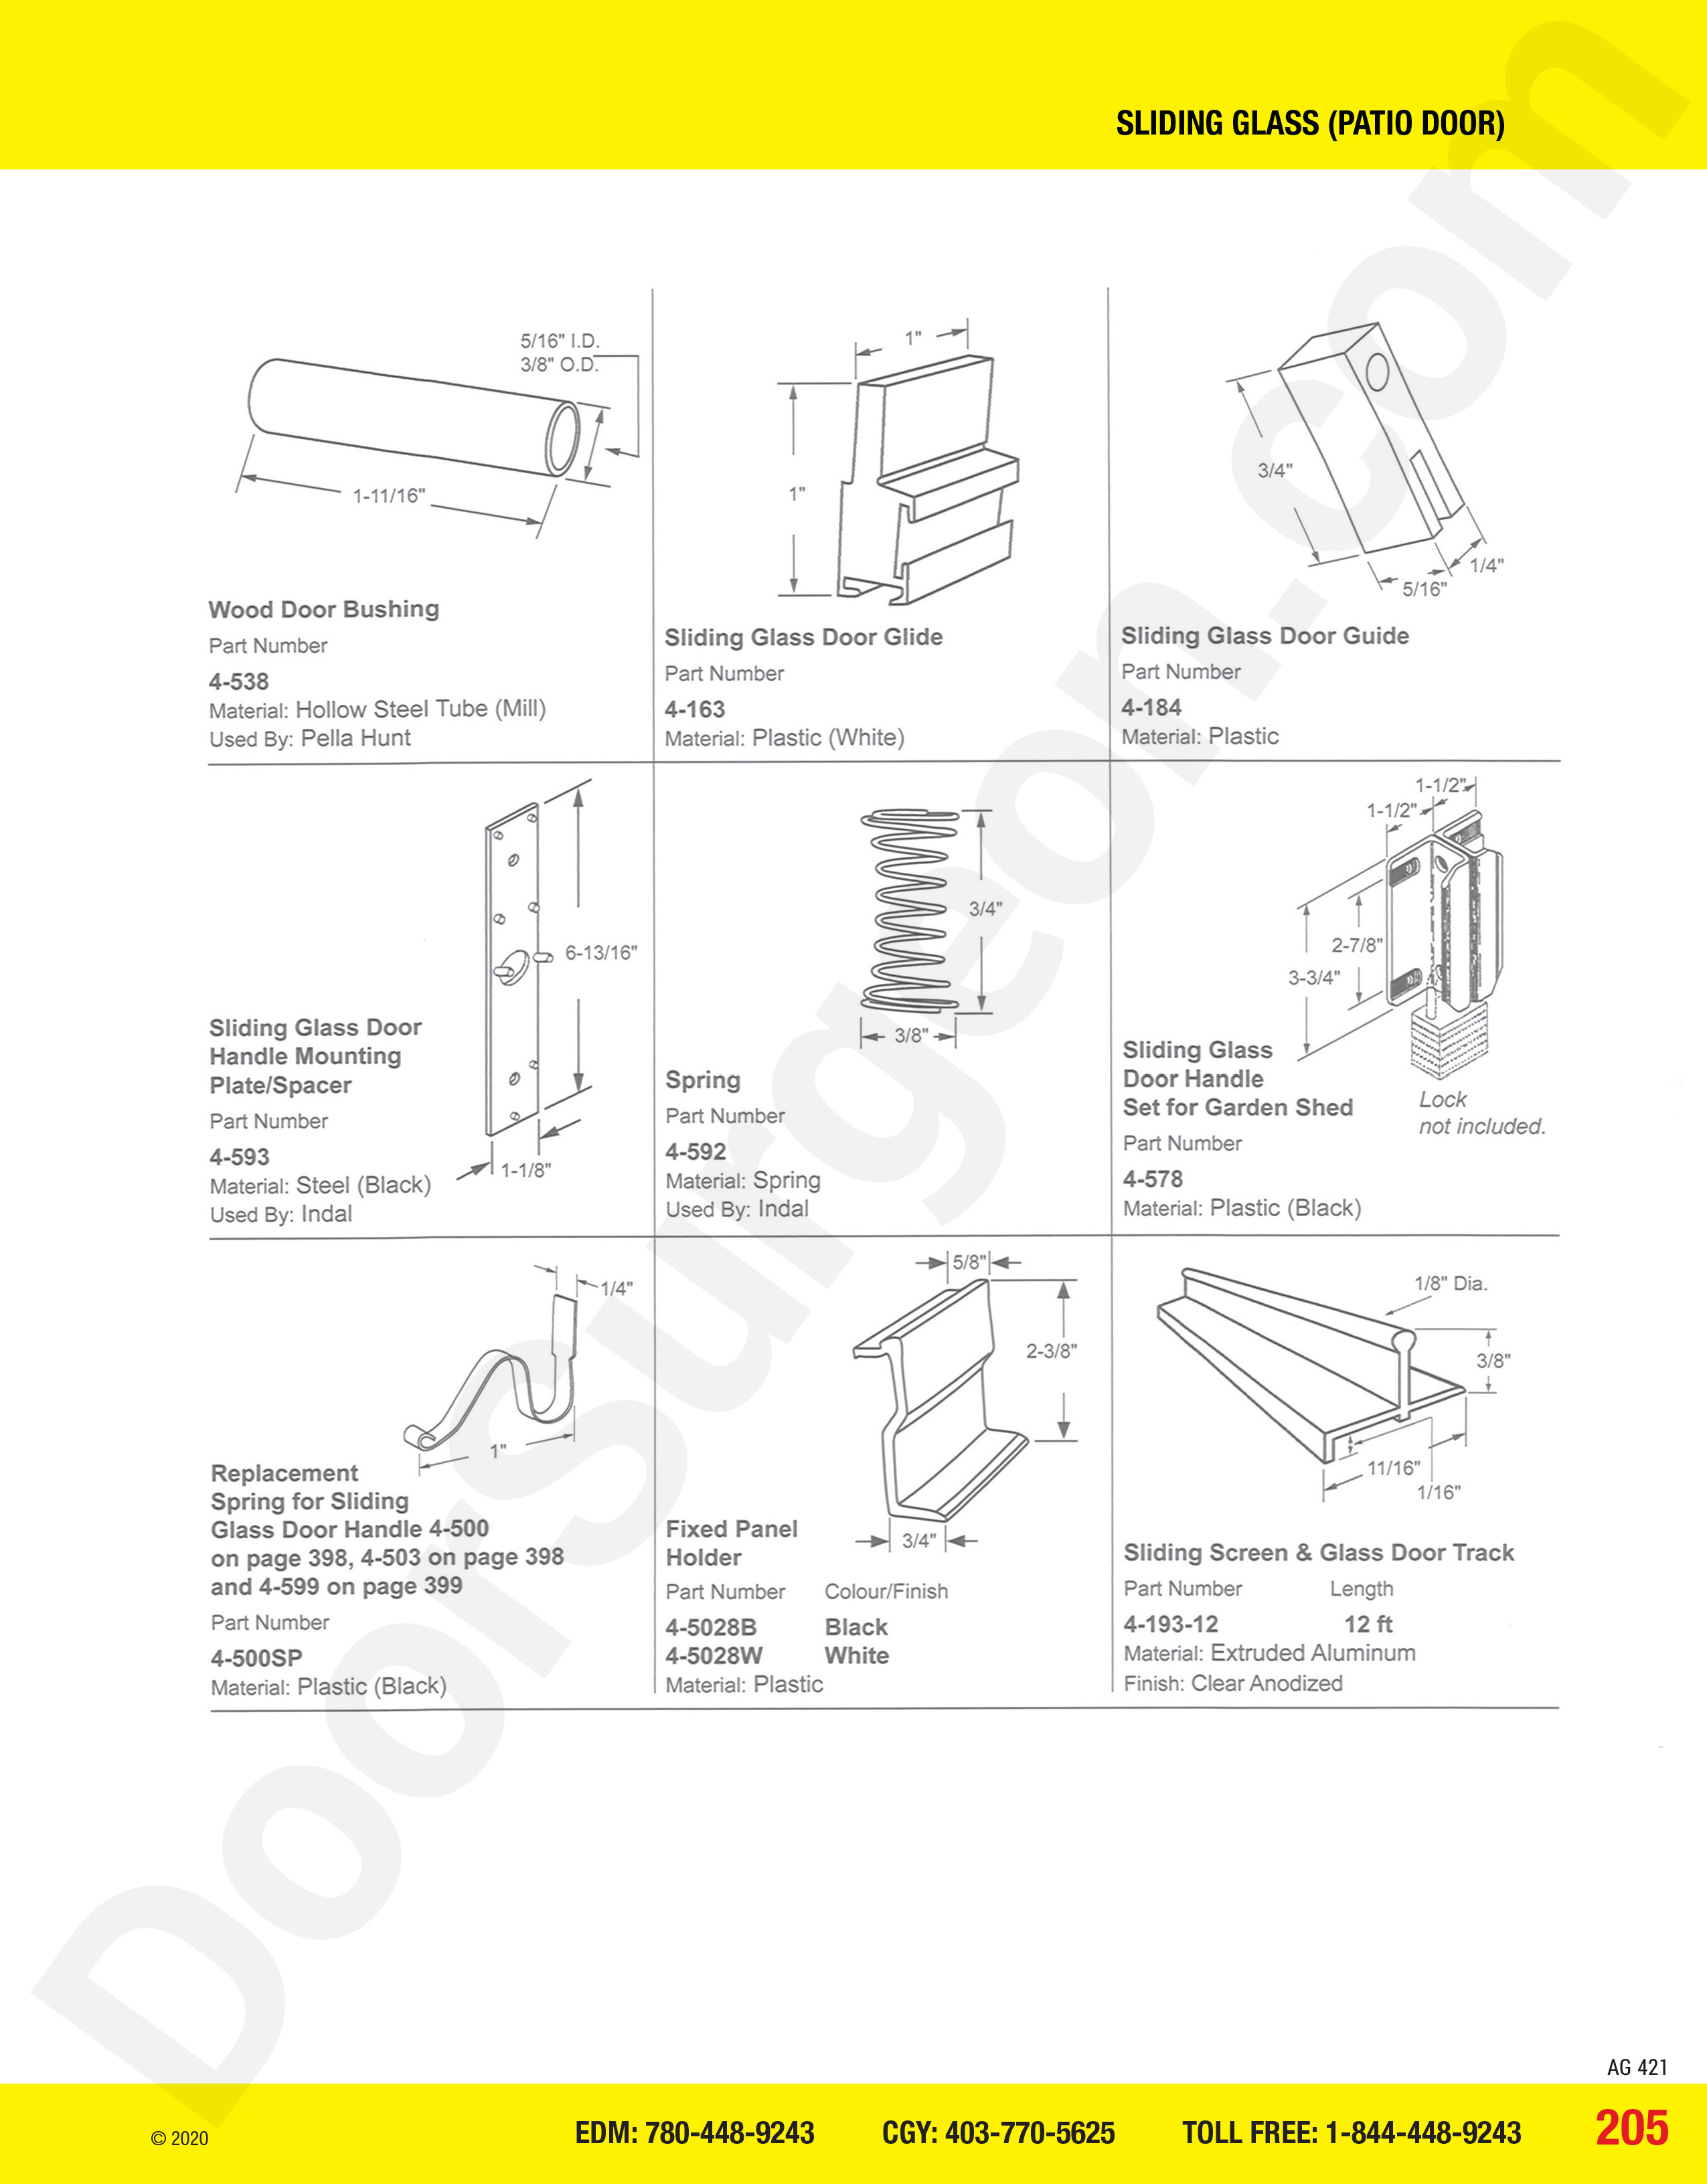 Sliding Glass and Patio Door miscellaneous parts